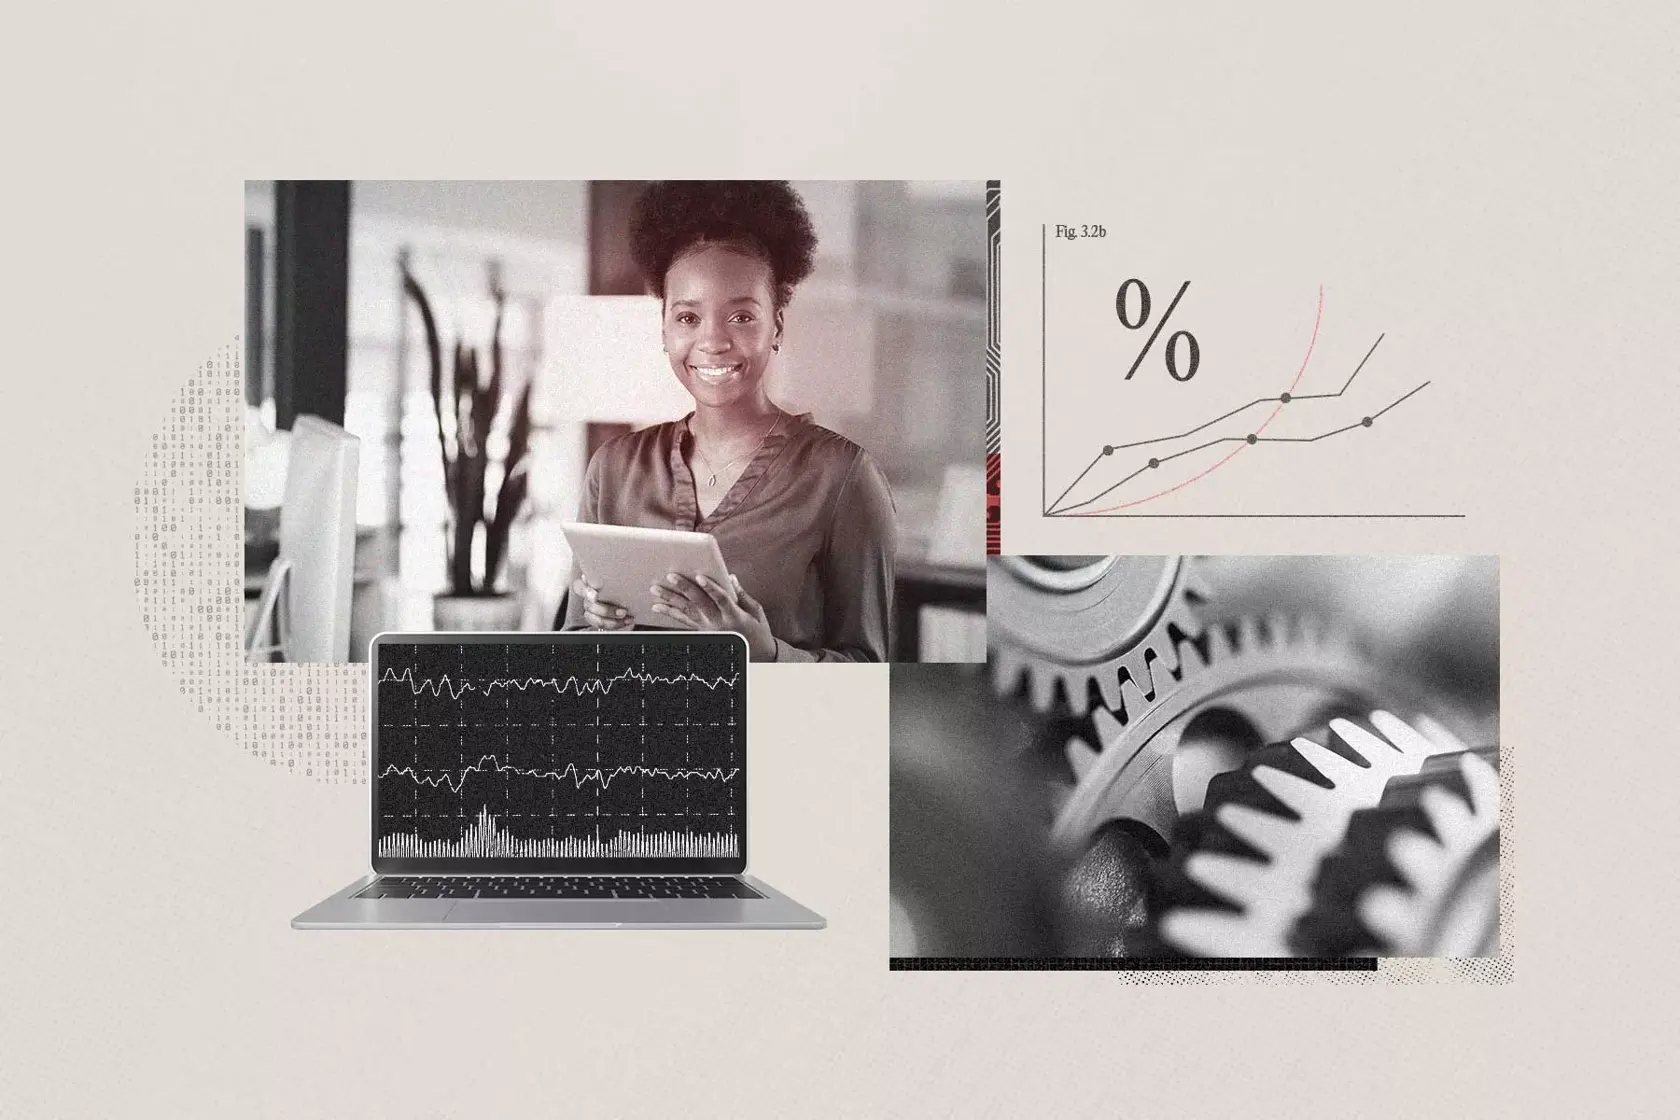 Image for a blog post on need-to-know AI operations statistics. Features a woman in a business setting, a laptop, and a graph showing data tracking upward